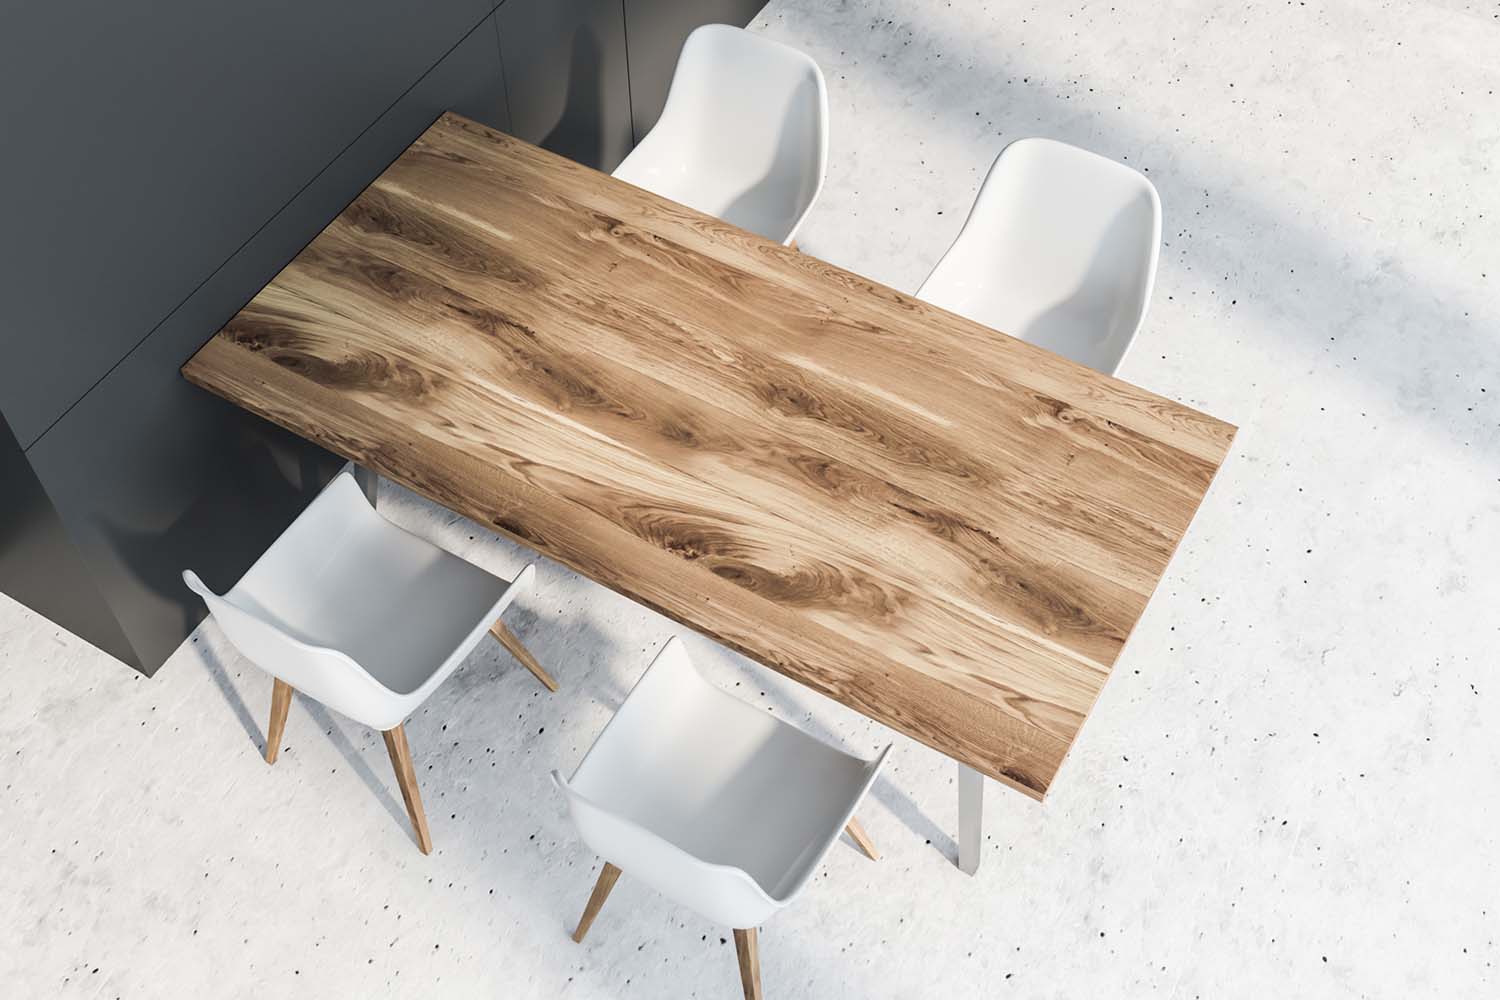 Top view of wooden dining table with four chairs standing in dining room with gray walls and stone floor. 3d rendering